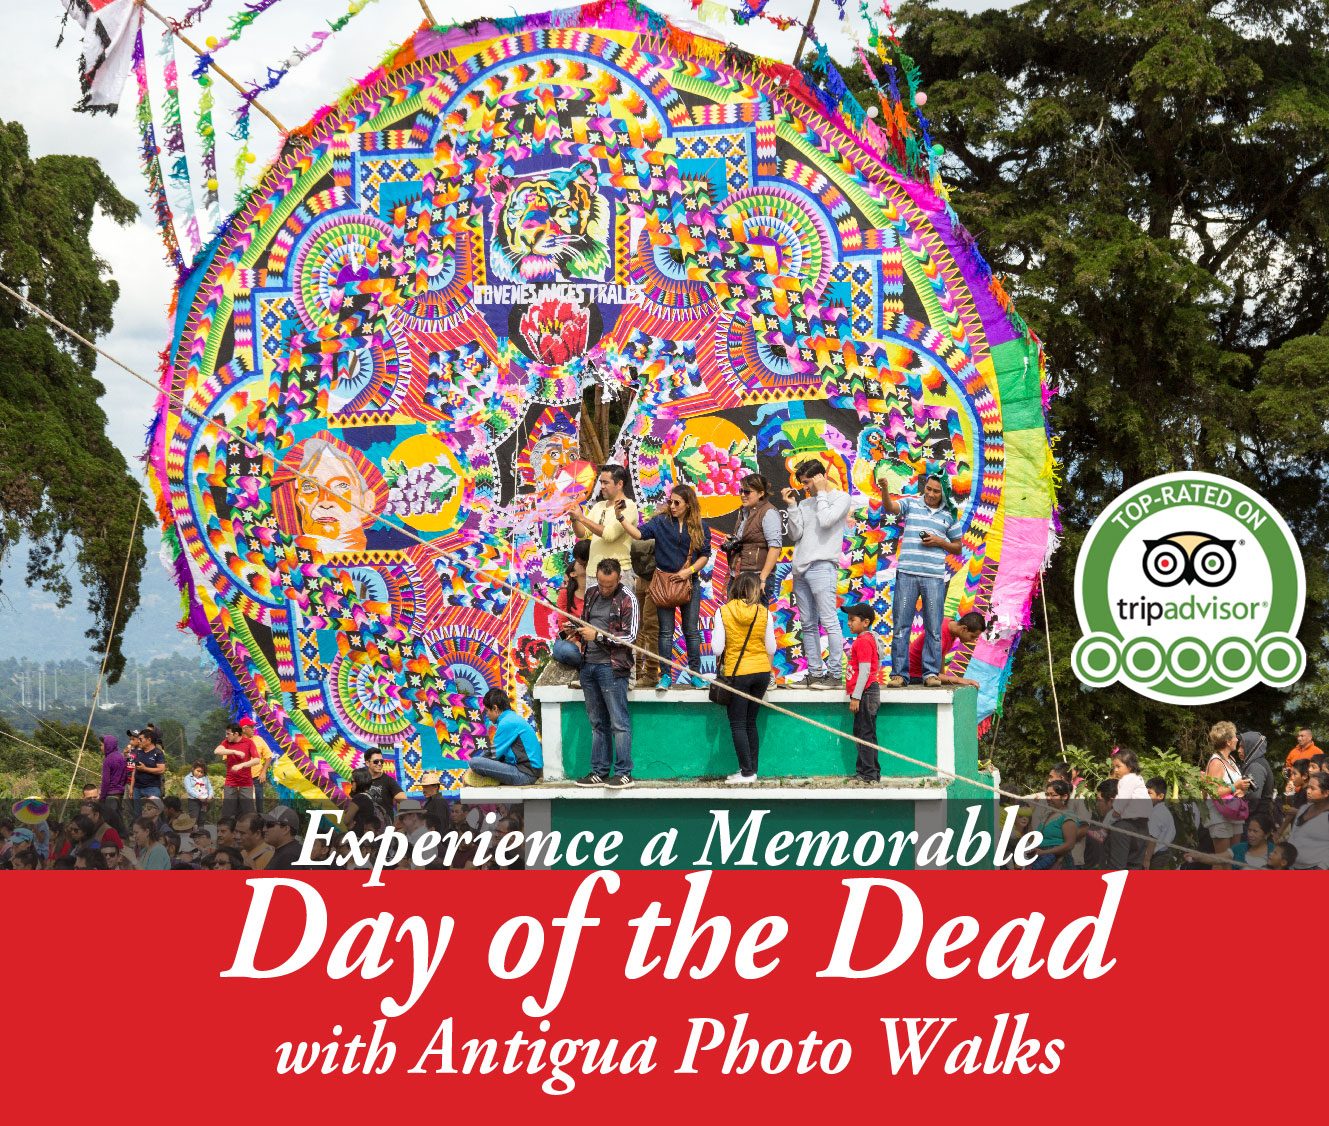 Experience an Amazing Day of the Dead with Photographer Rudy Giron